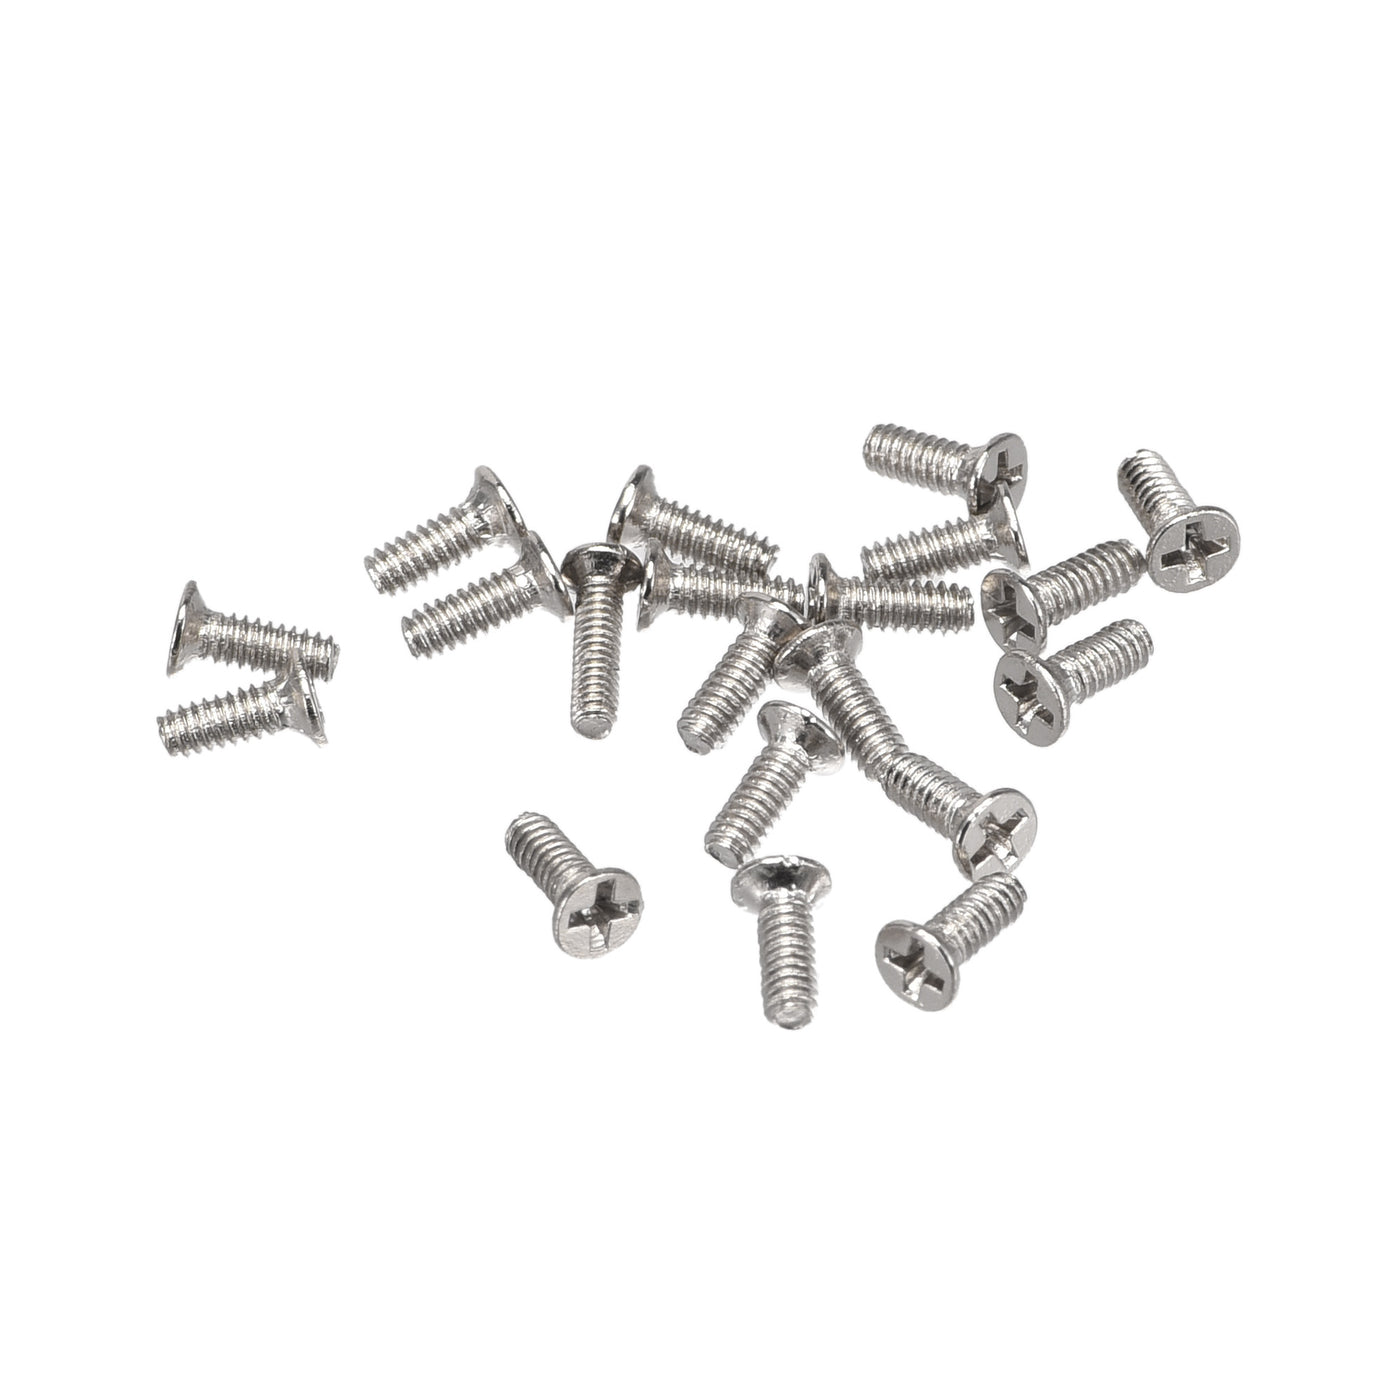 uxcell Uxcell M1.4 x 4mm Tiny Screws Phillips Flat Head Screws Carbon Steel Machine Screws for Glasses Spectacles Watch and Other Small Electronics 500pcs